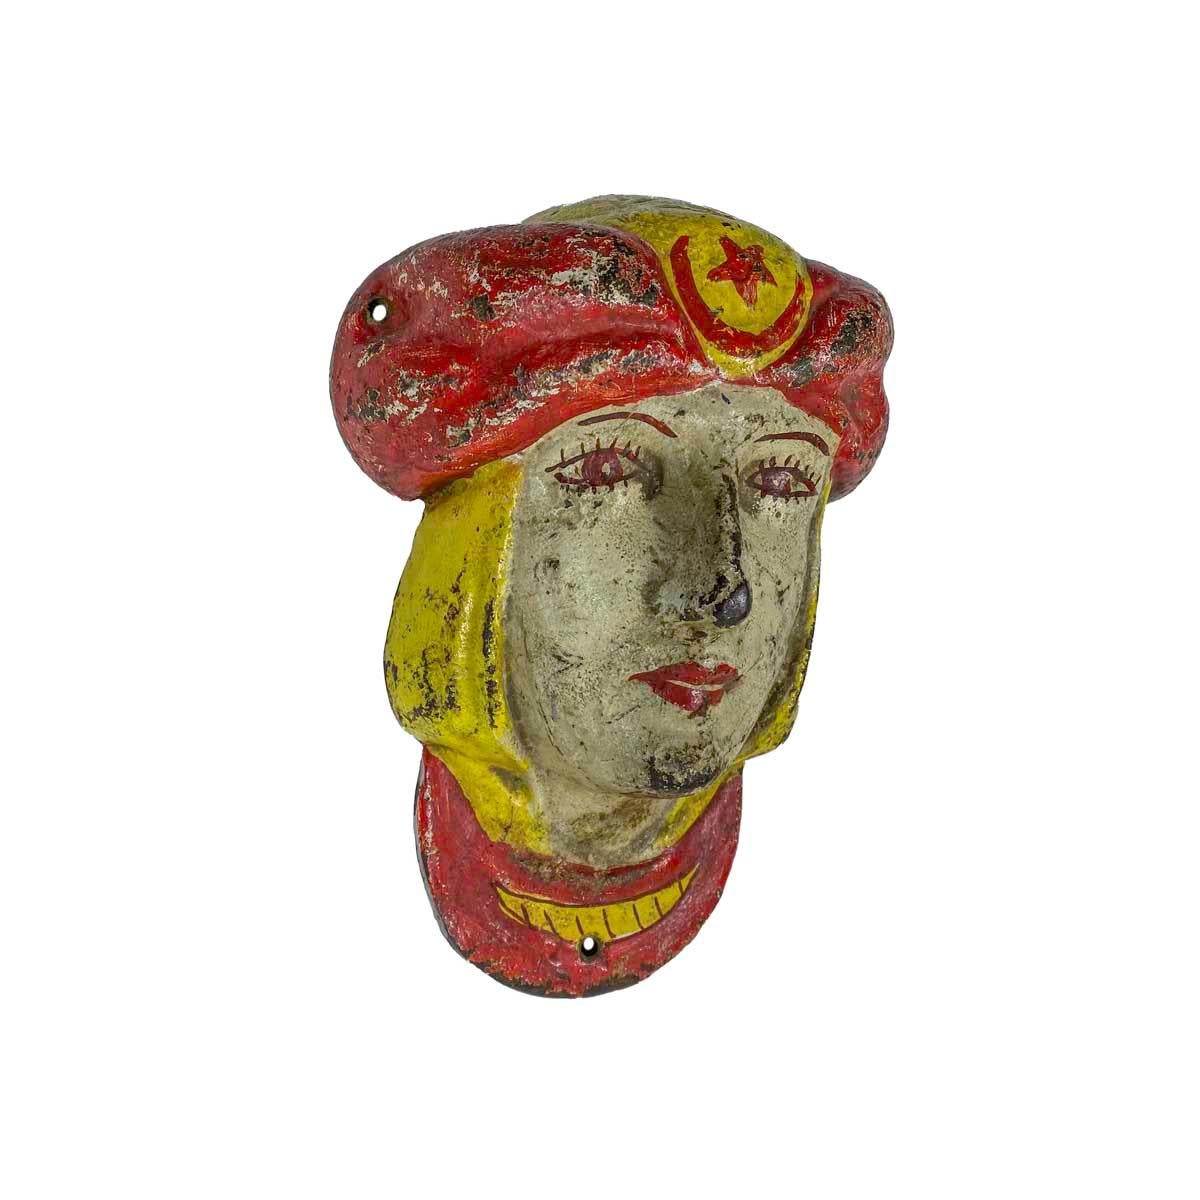 Painted cast-iron mask of a woman wearing a red turban with a star and crescent moon. Typical of amusement park and carnival art of the period it is painted in strong, bright colors, early 20th century.
  